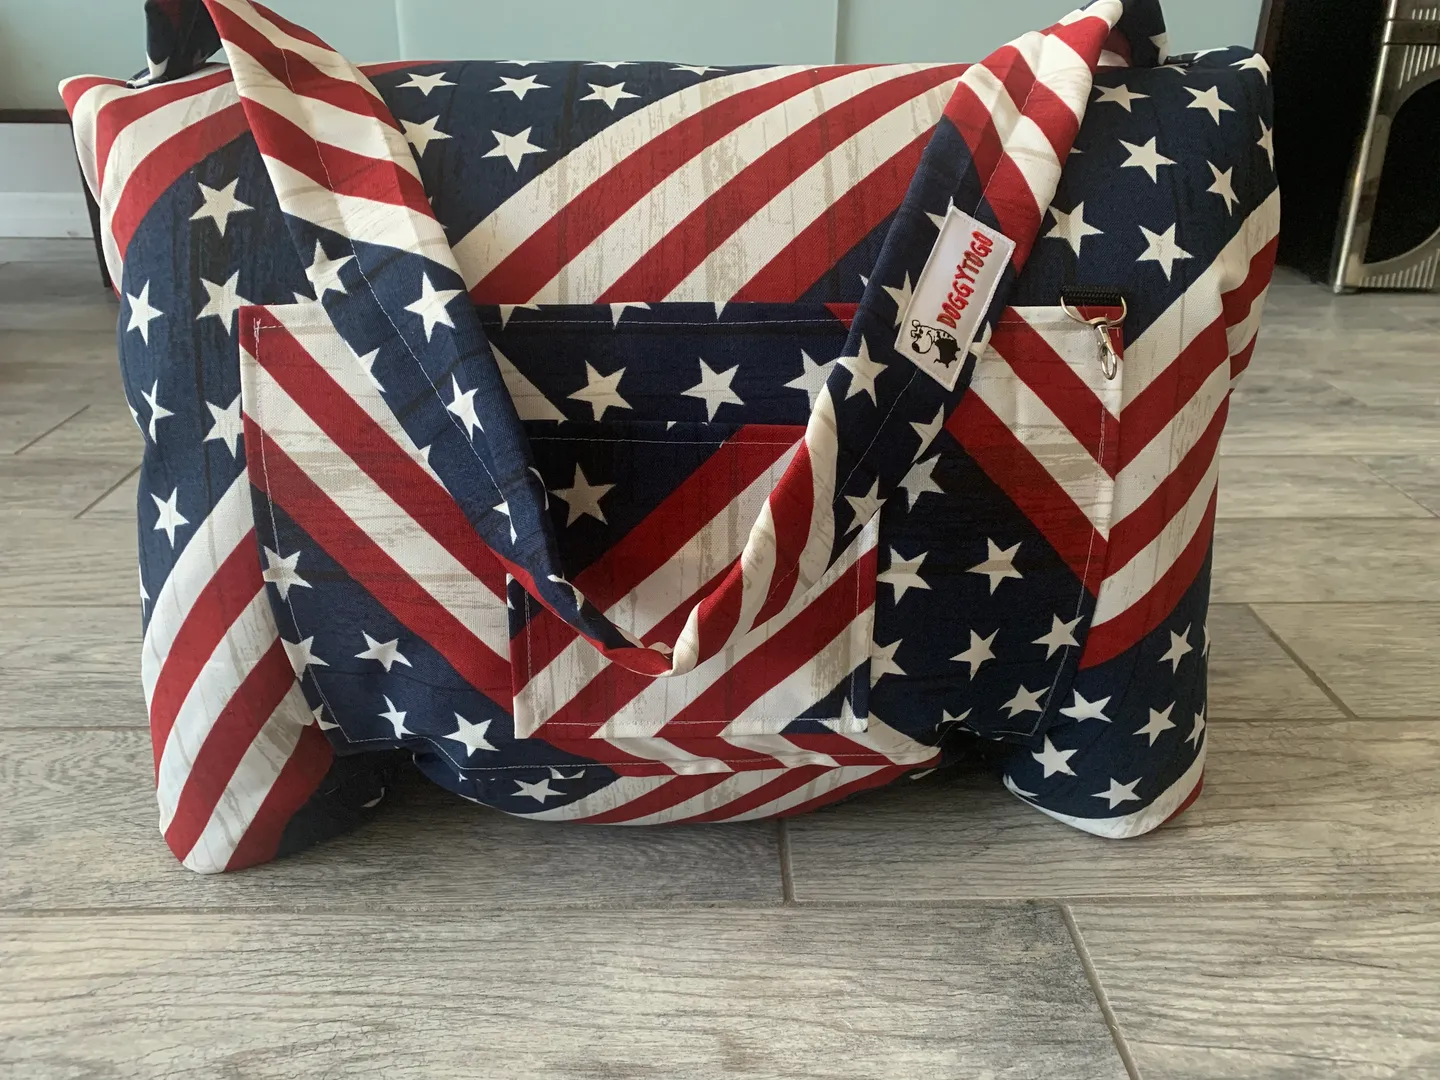 A dog bed bag with the pattern of the United States of America flag printed on it